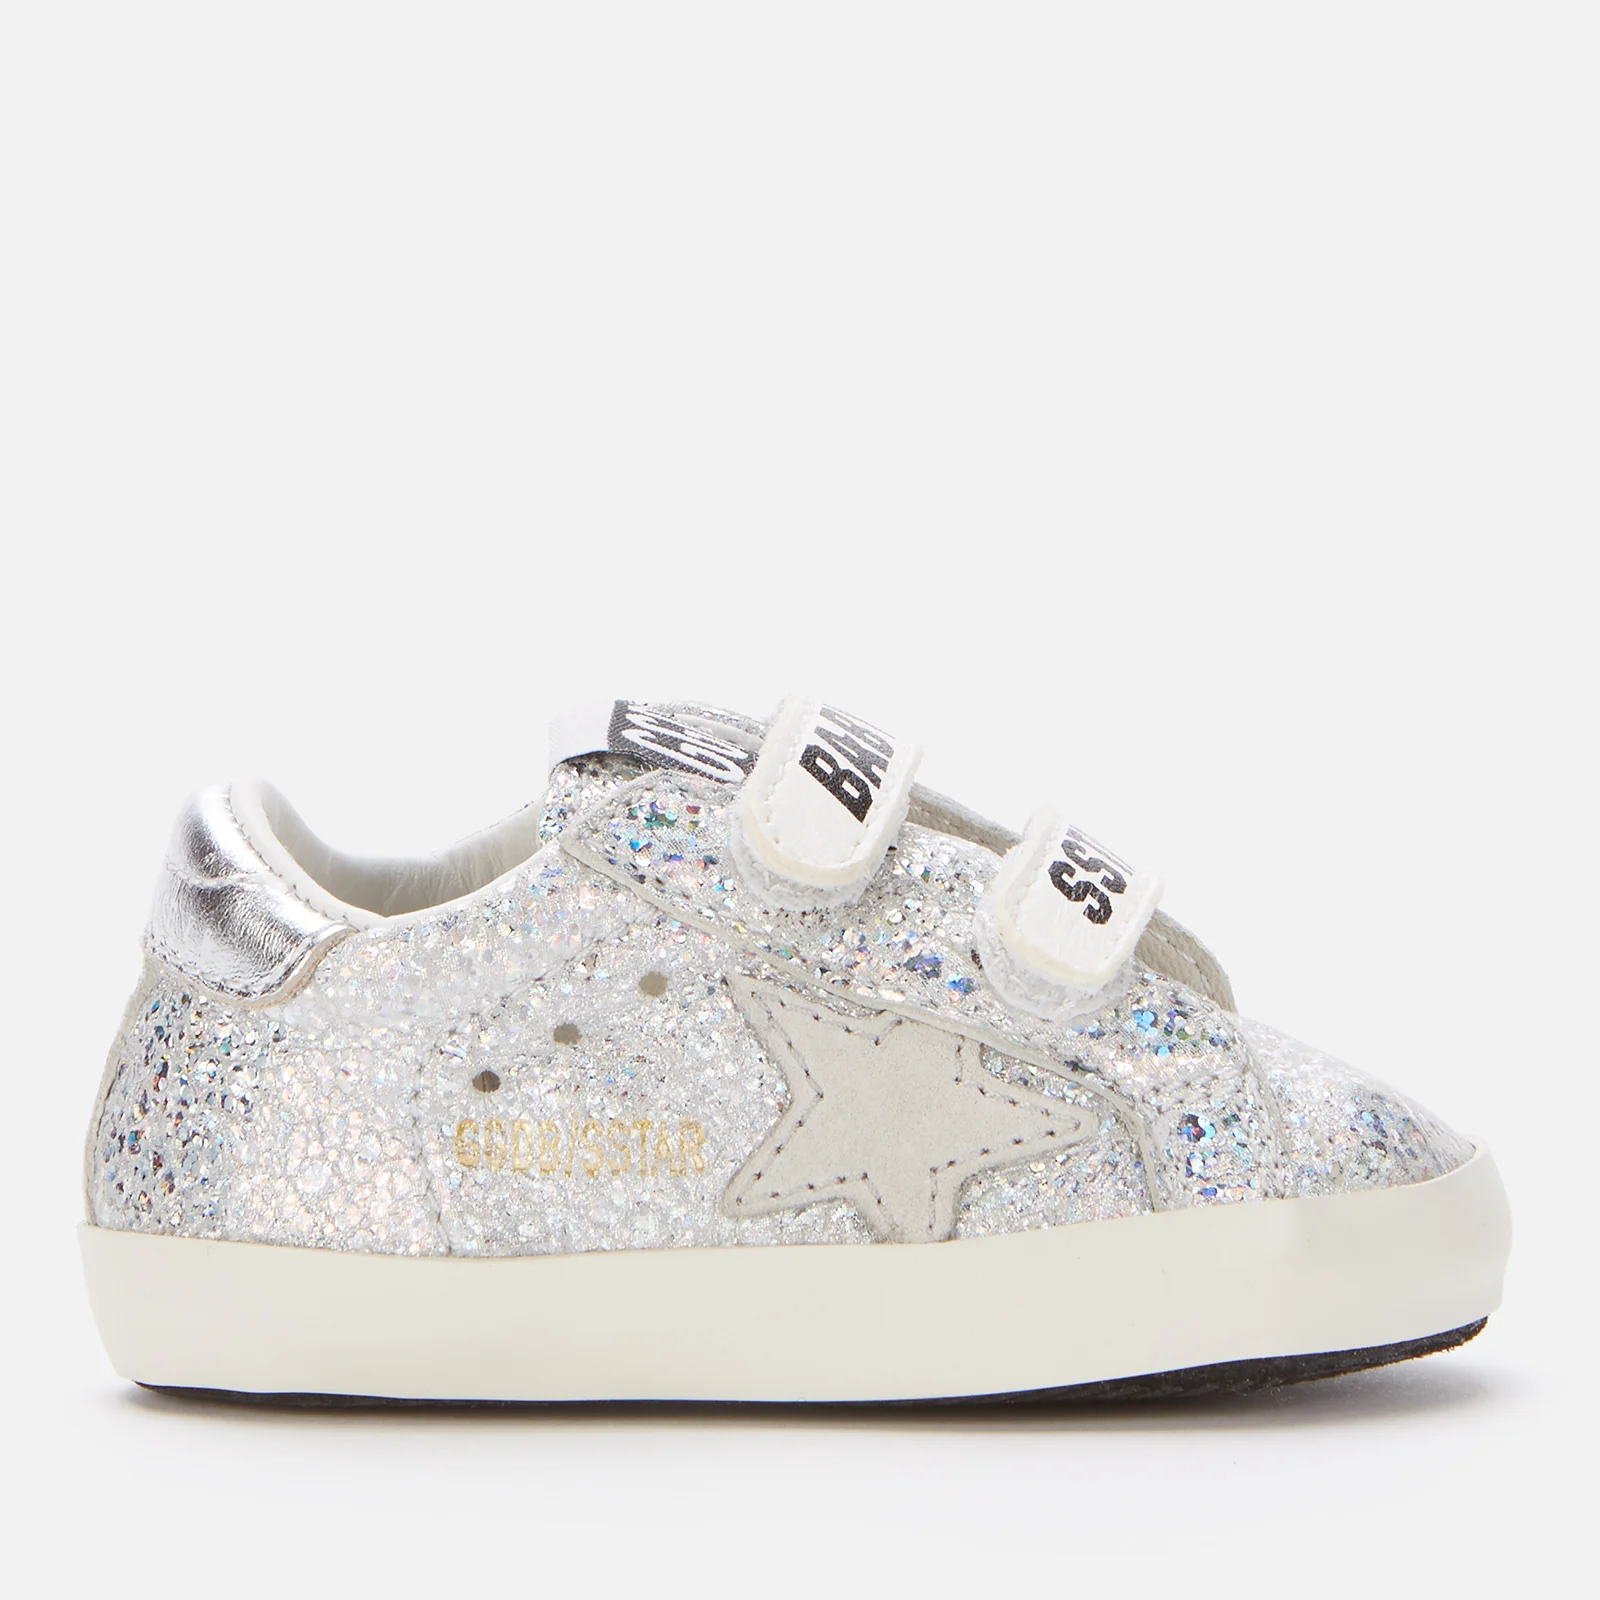 Golden Goose Babys' Iridescent Leather Nappa Stripes Laminated Heel Trainers - Silver/Ice/White Image 1